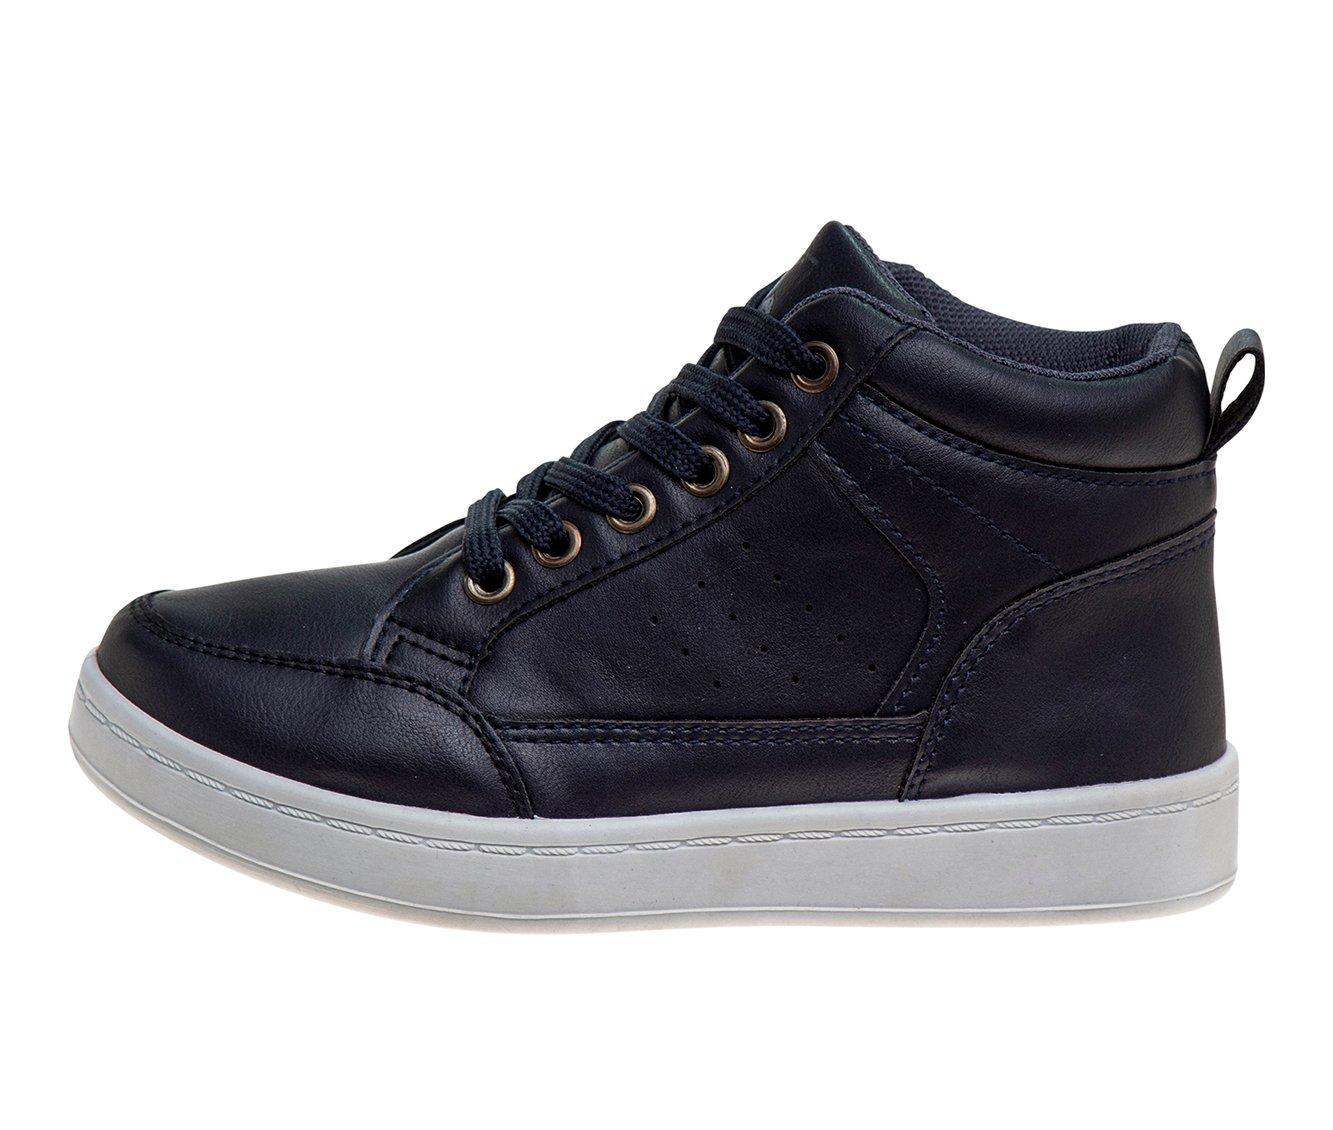 Boys' Beverly Hills Polo Club Little Kid & Big Denver High Top Sneakers